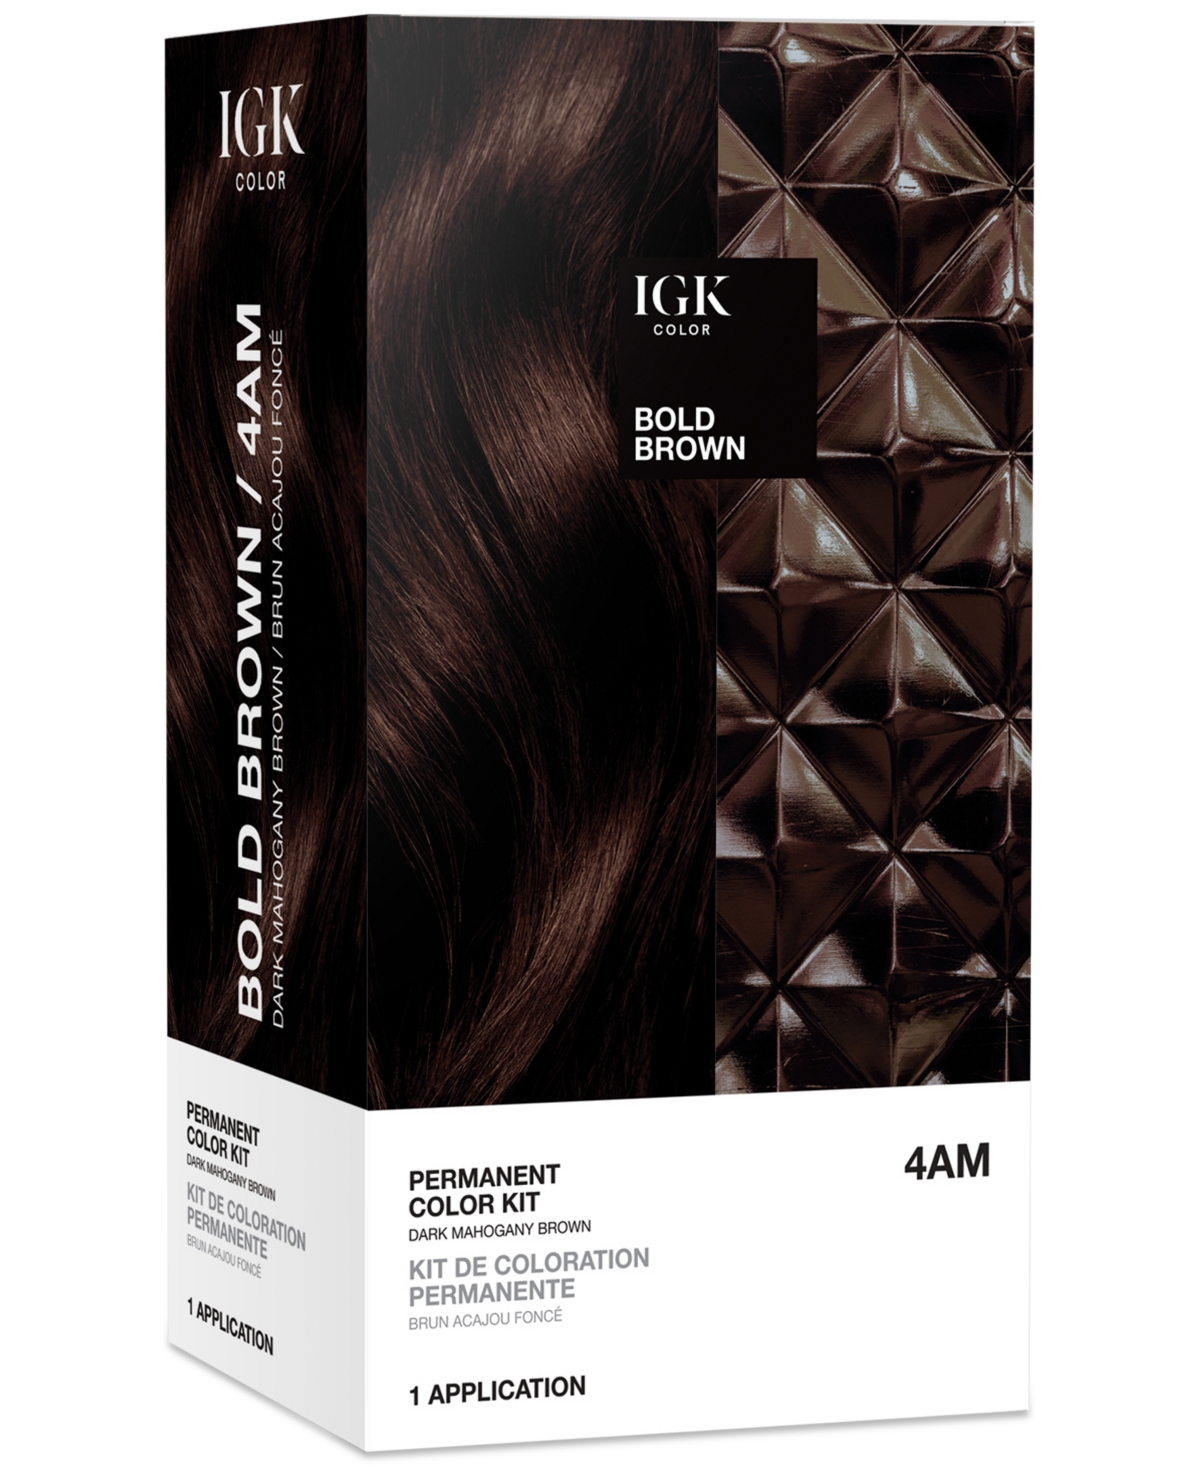 Igk Hair 6-pc. Permanent Color Set In Bold Brown